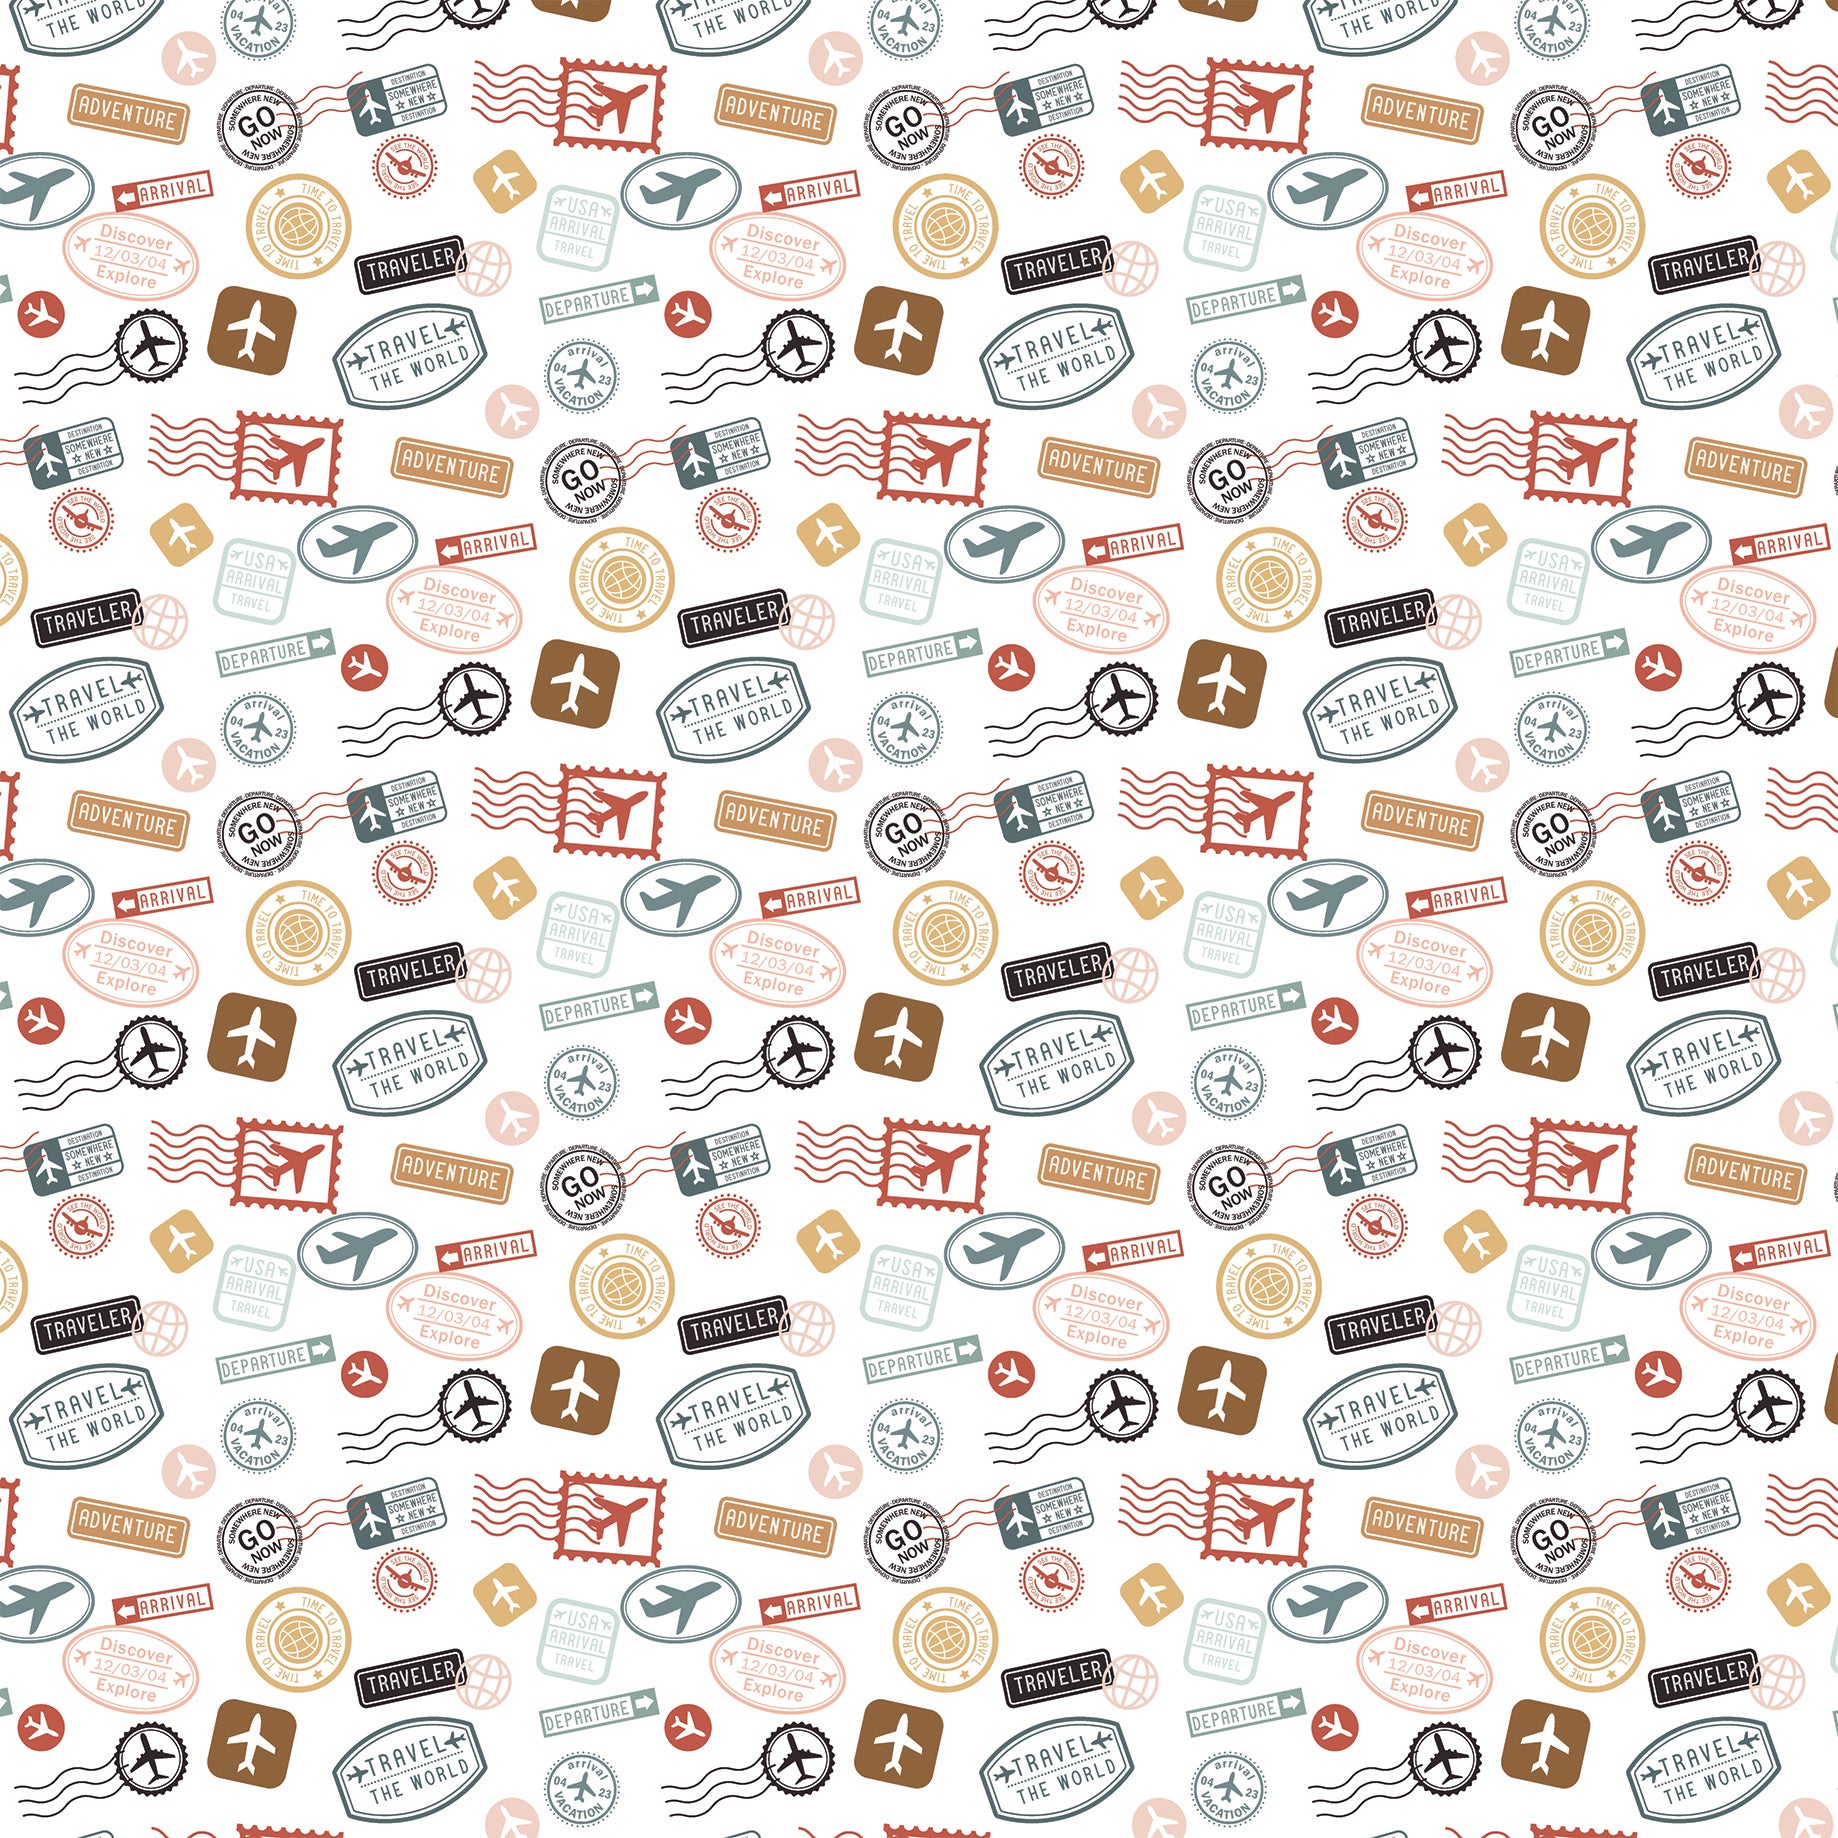 Let's Take the Trip Collection Traveling Stamps 12 x 12 Double-Sided Scrapbook Paper by Echo Park Paper